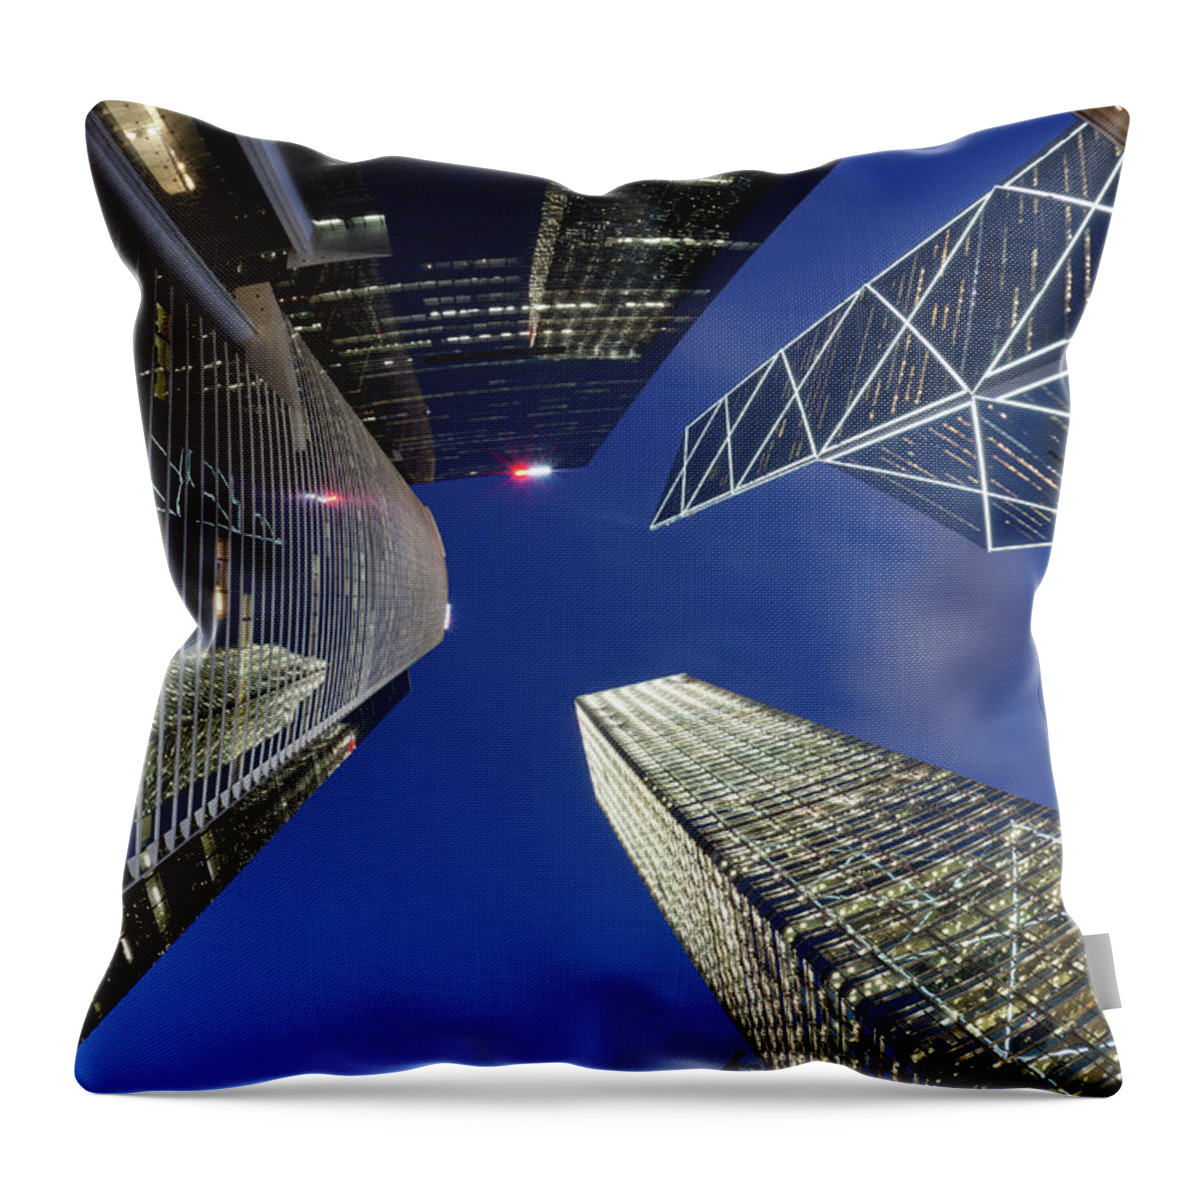 Chinese Culture Throw Pillow featuring the photograph Fisheye View Of Hong Kong Skyscrapers #5 by Winhorse